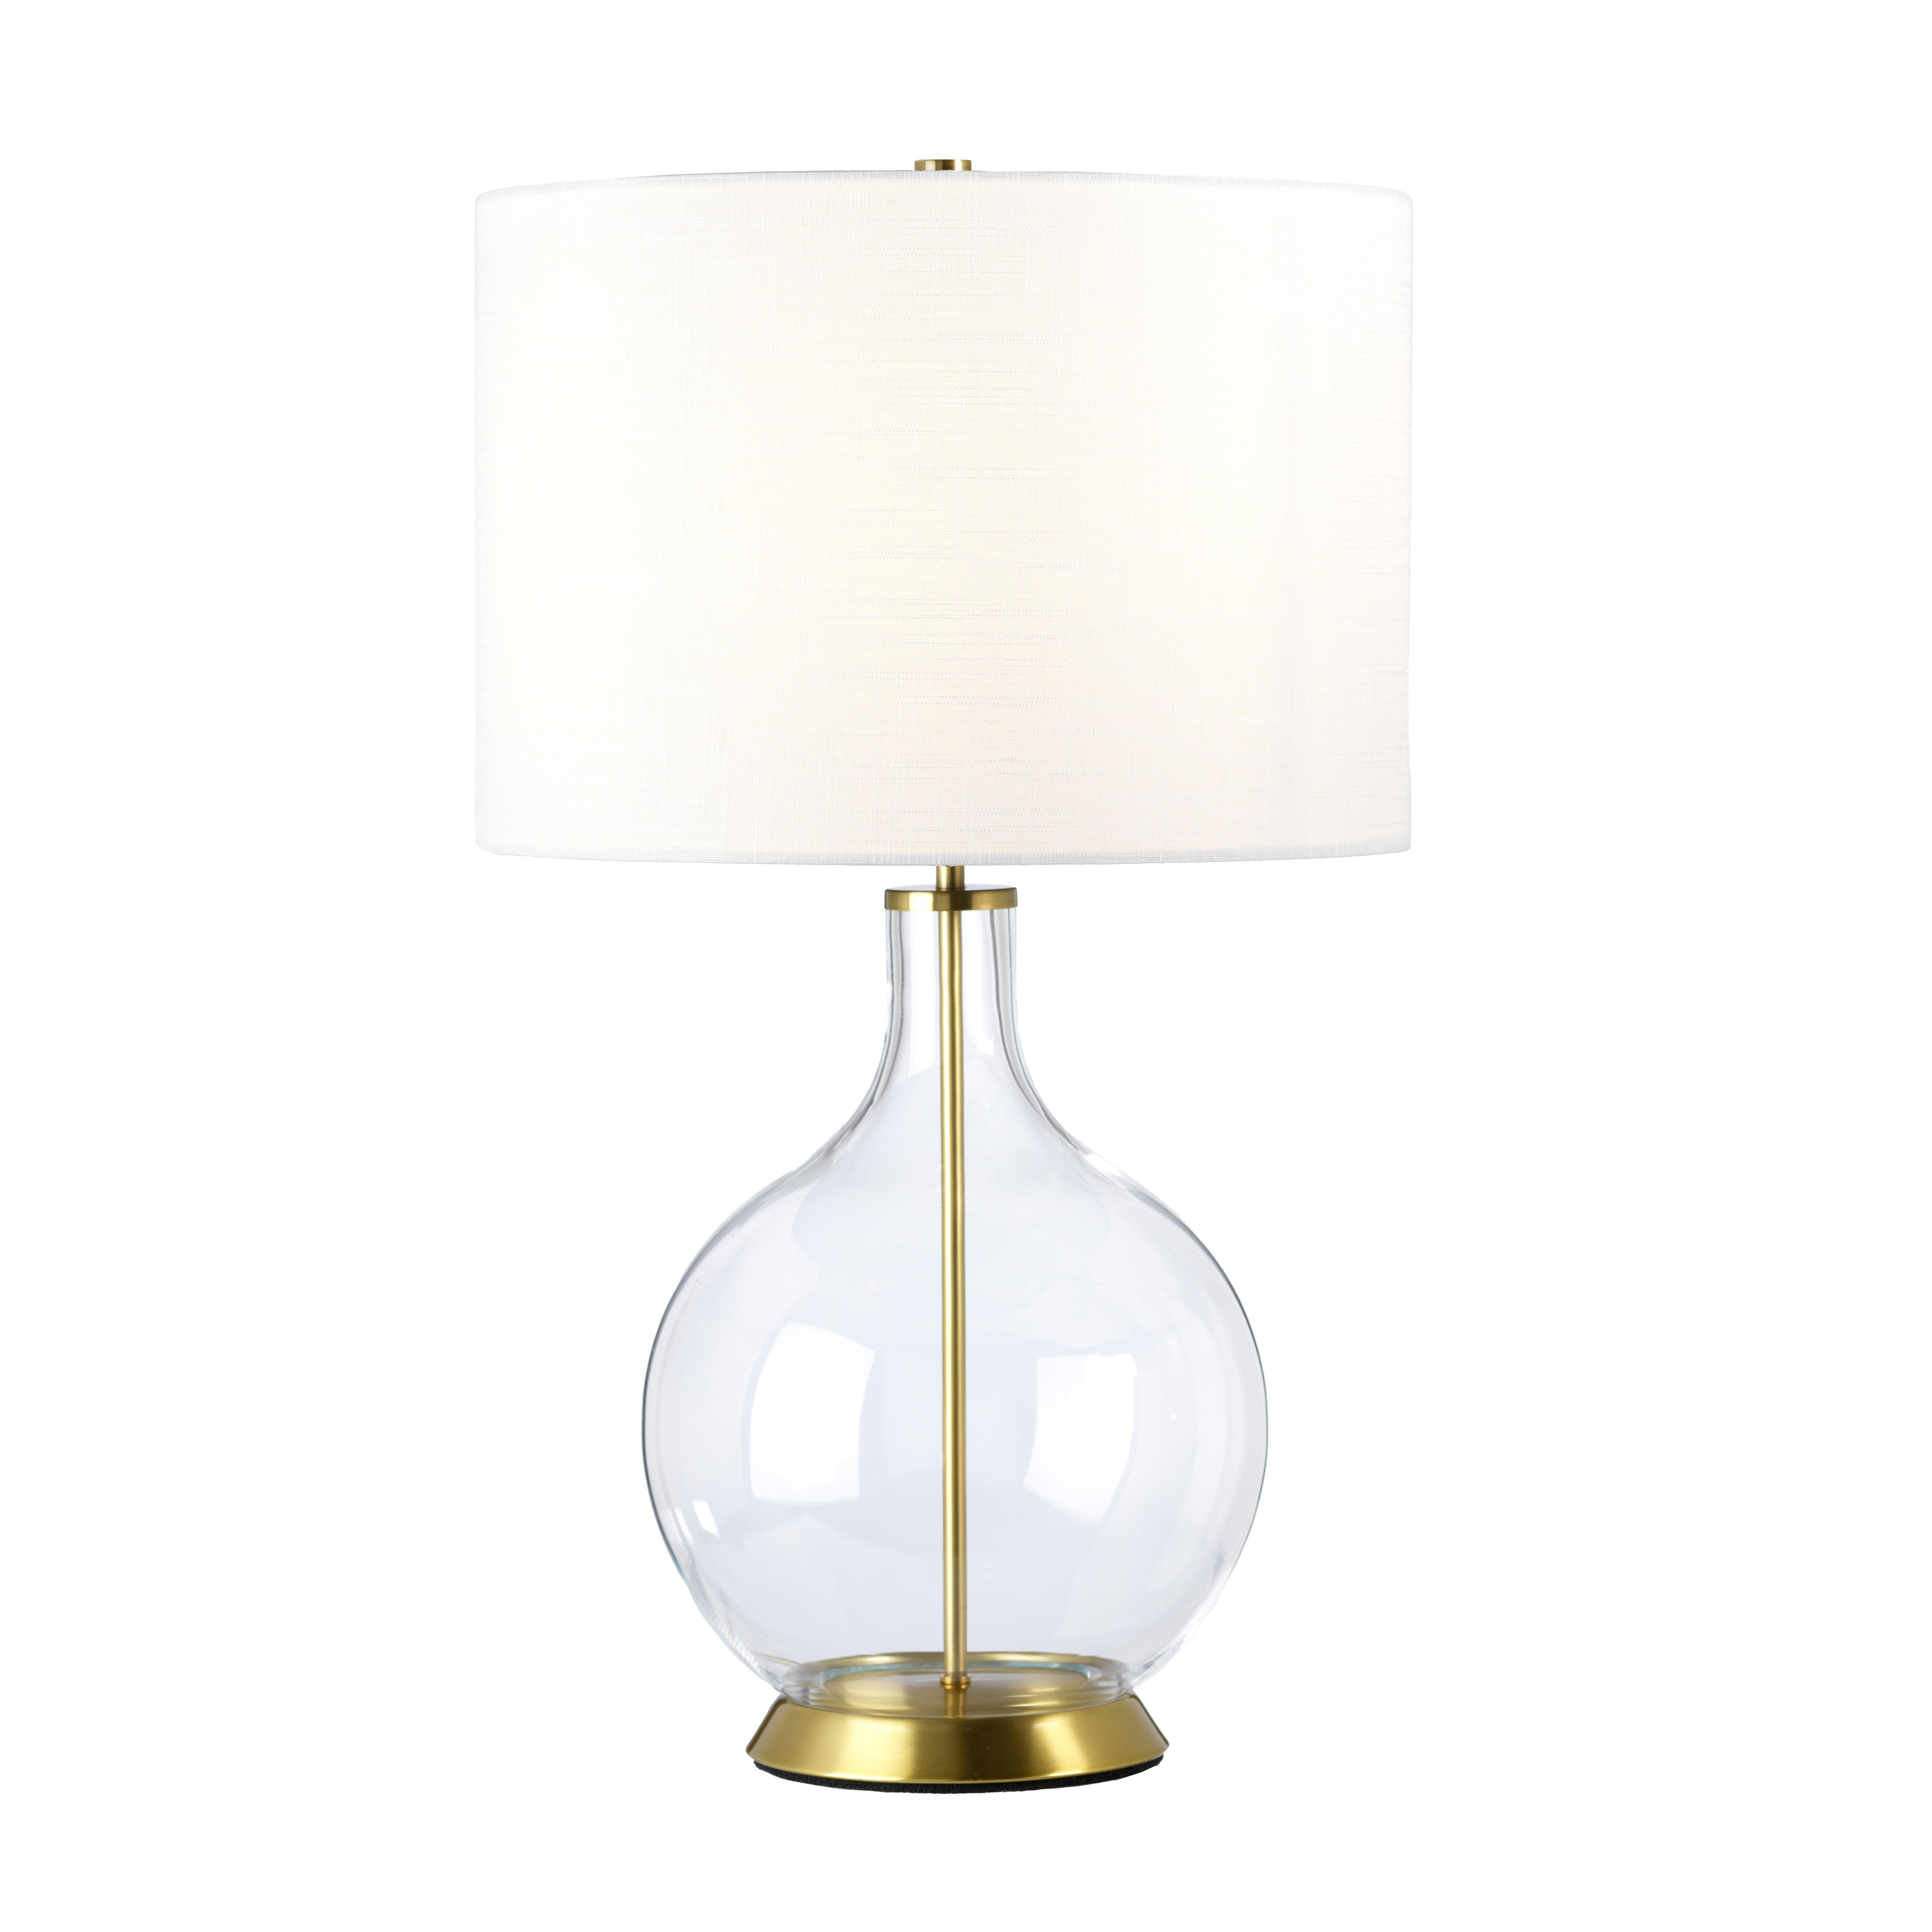 Orb Table Lamp with Round Shade Aged Brass